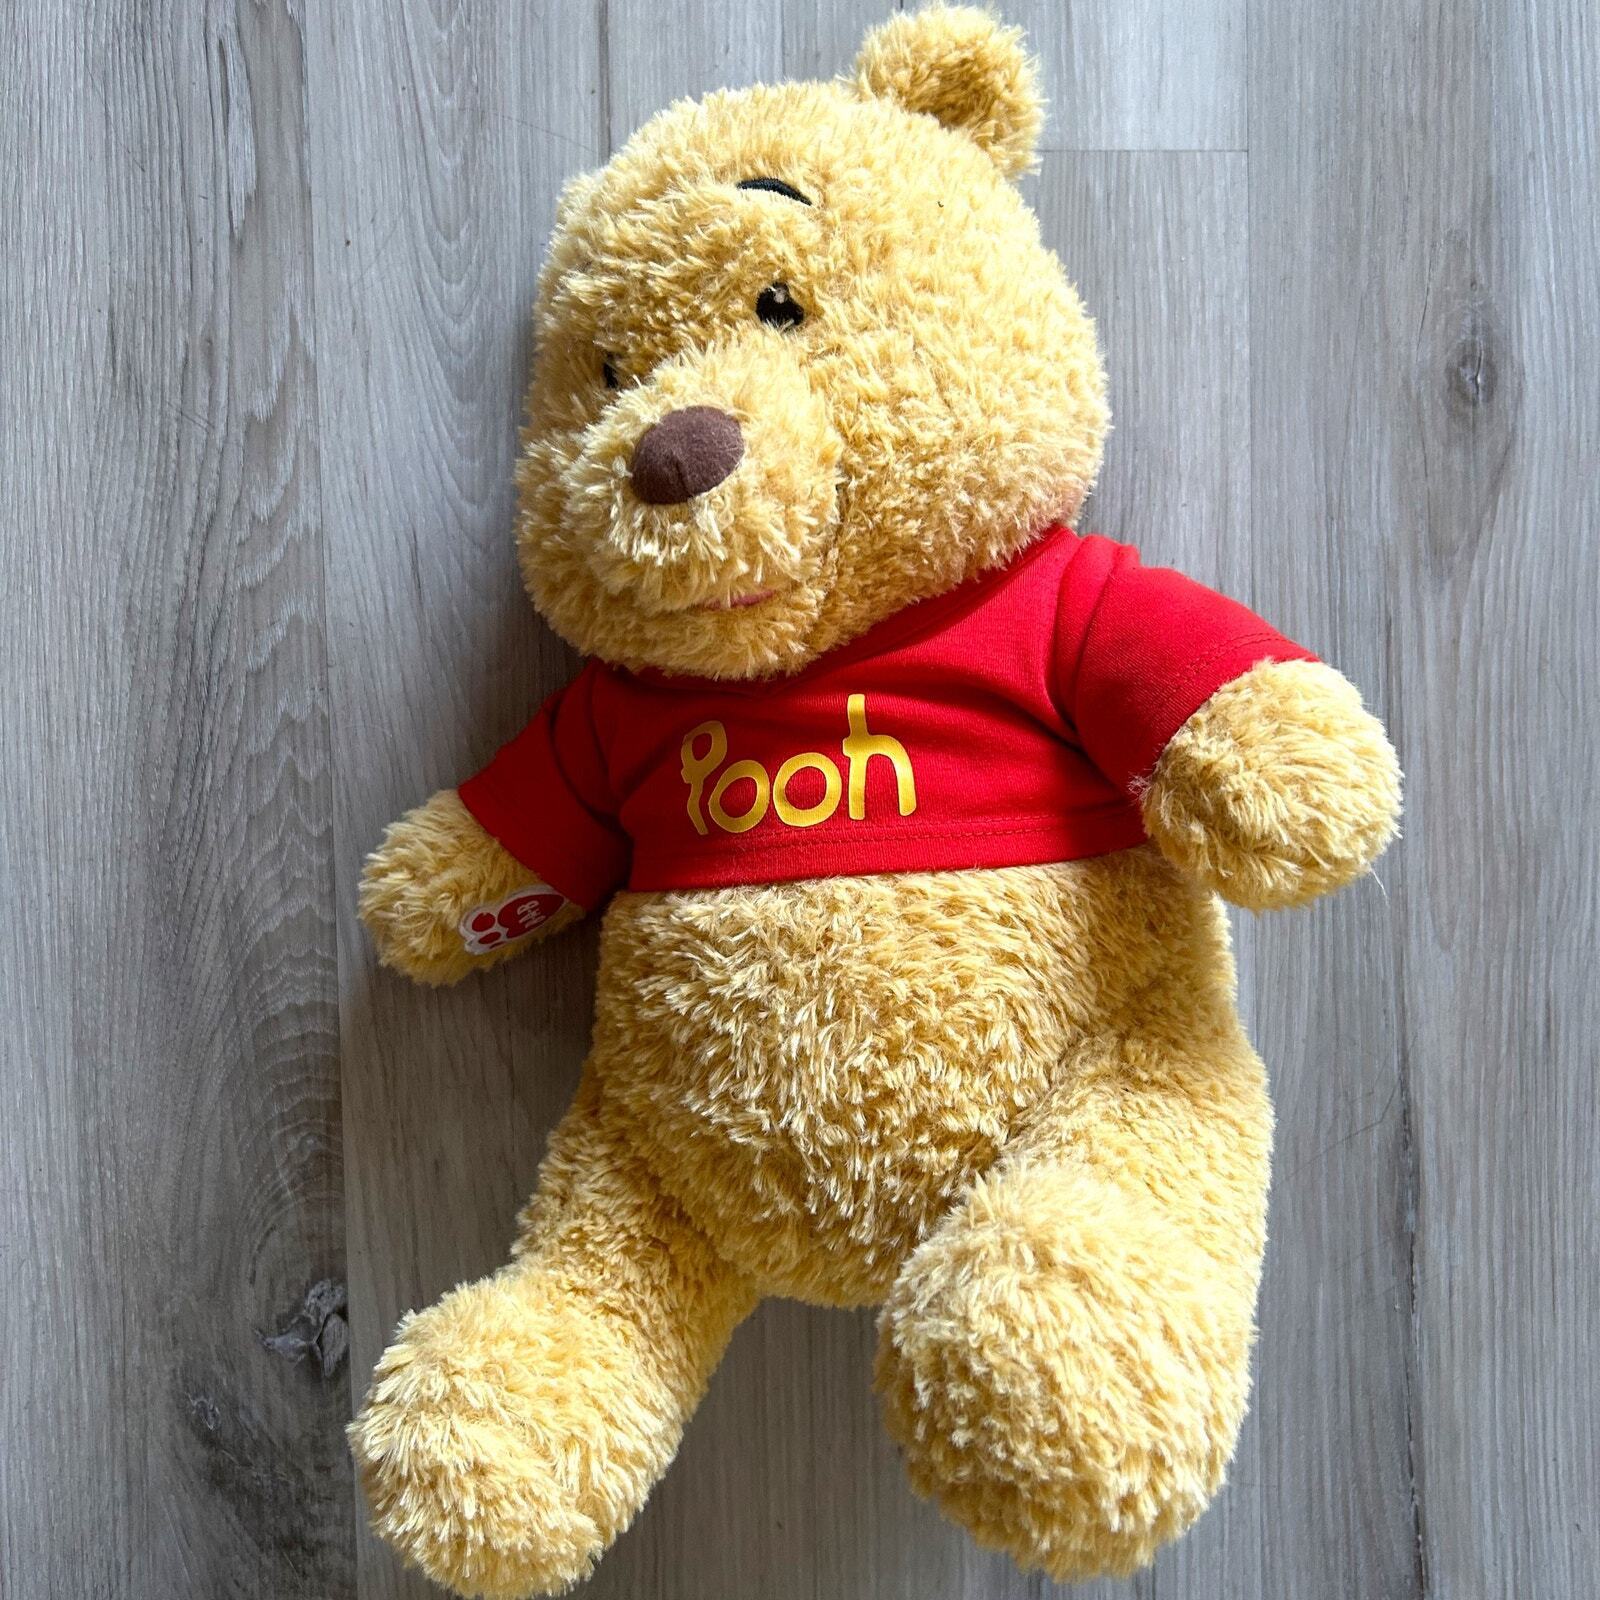 Rare Build-A-Bear Exclusive Disney Winnie The Pooh with Shirt and Working Sound